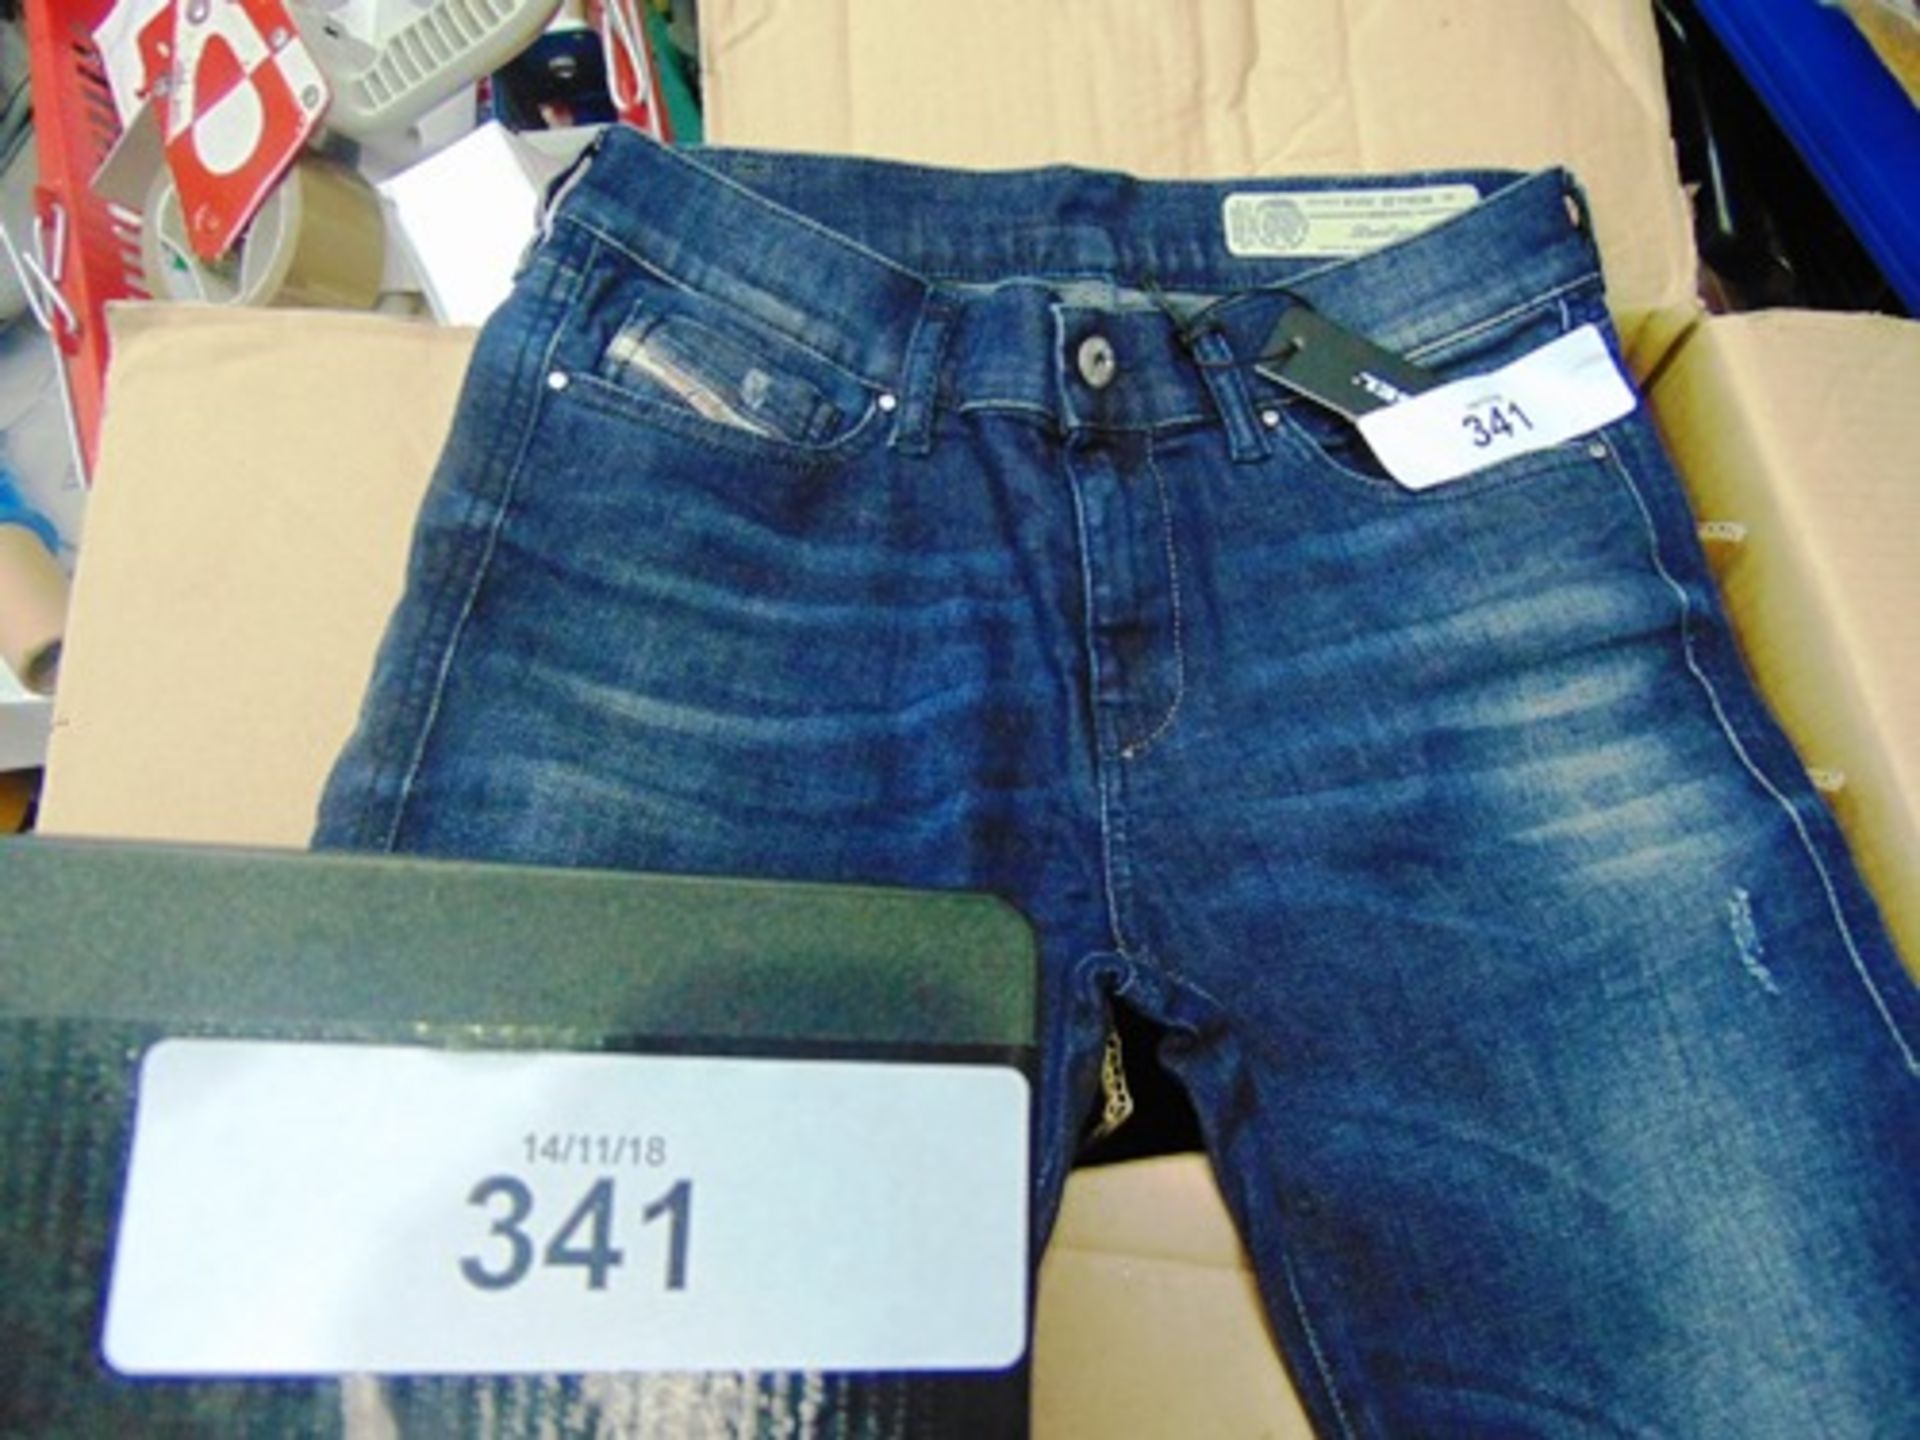 1 x pair of Diesel straitzee-R L32 trousers, size 28, length 32, RRP £80.00 - New with tags (CC2)